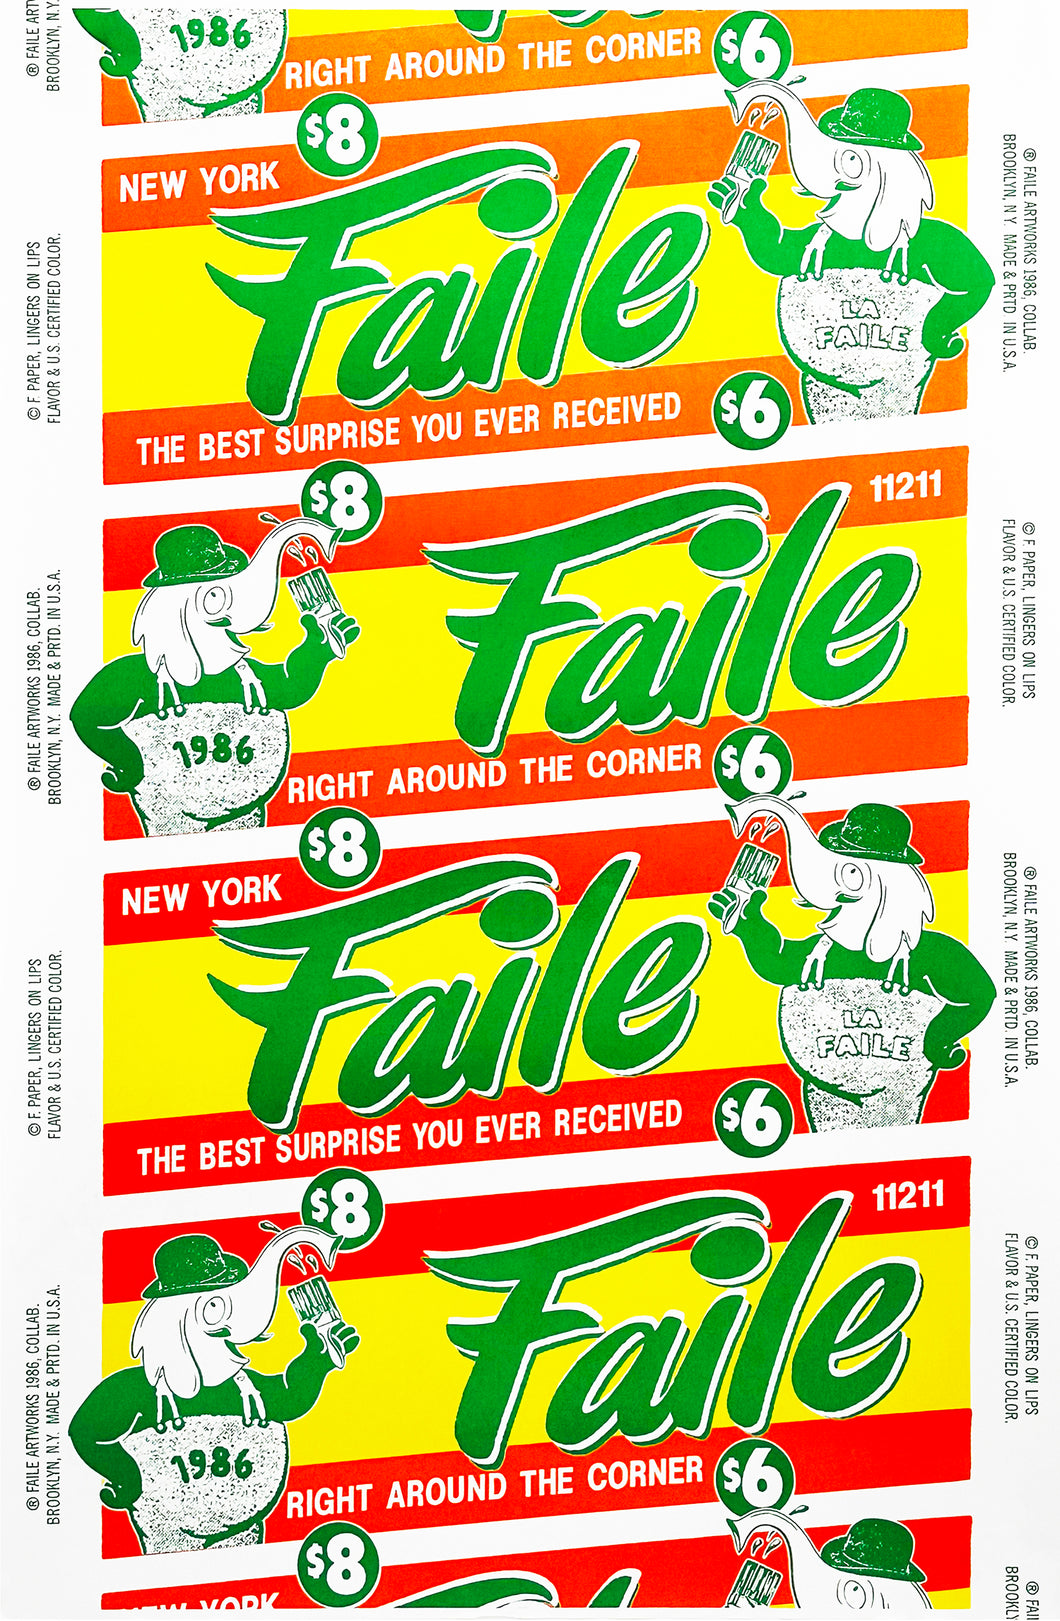 FAILE 'Around the Corner' Offset Lithograph Poster - Signari Gallery 